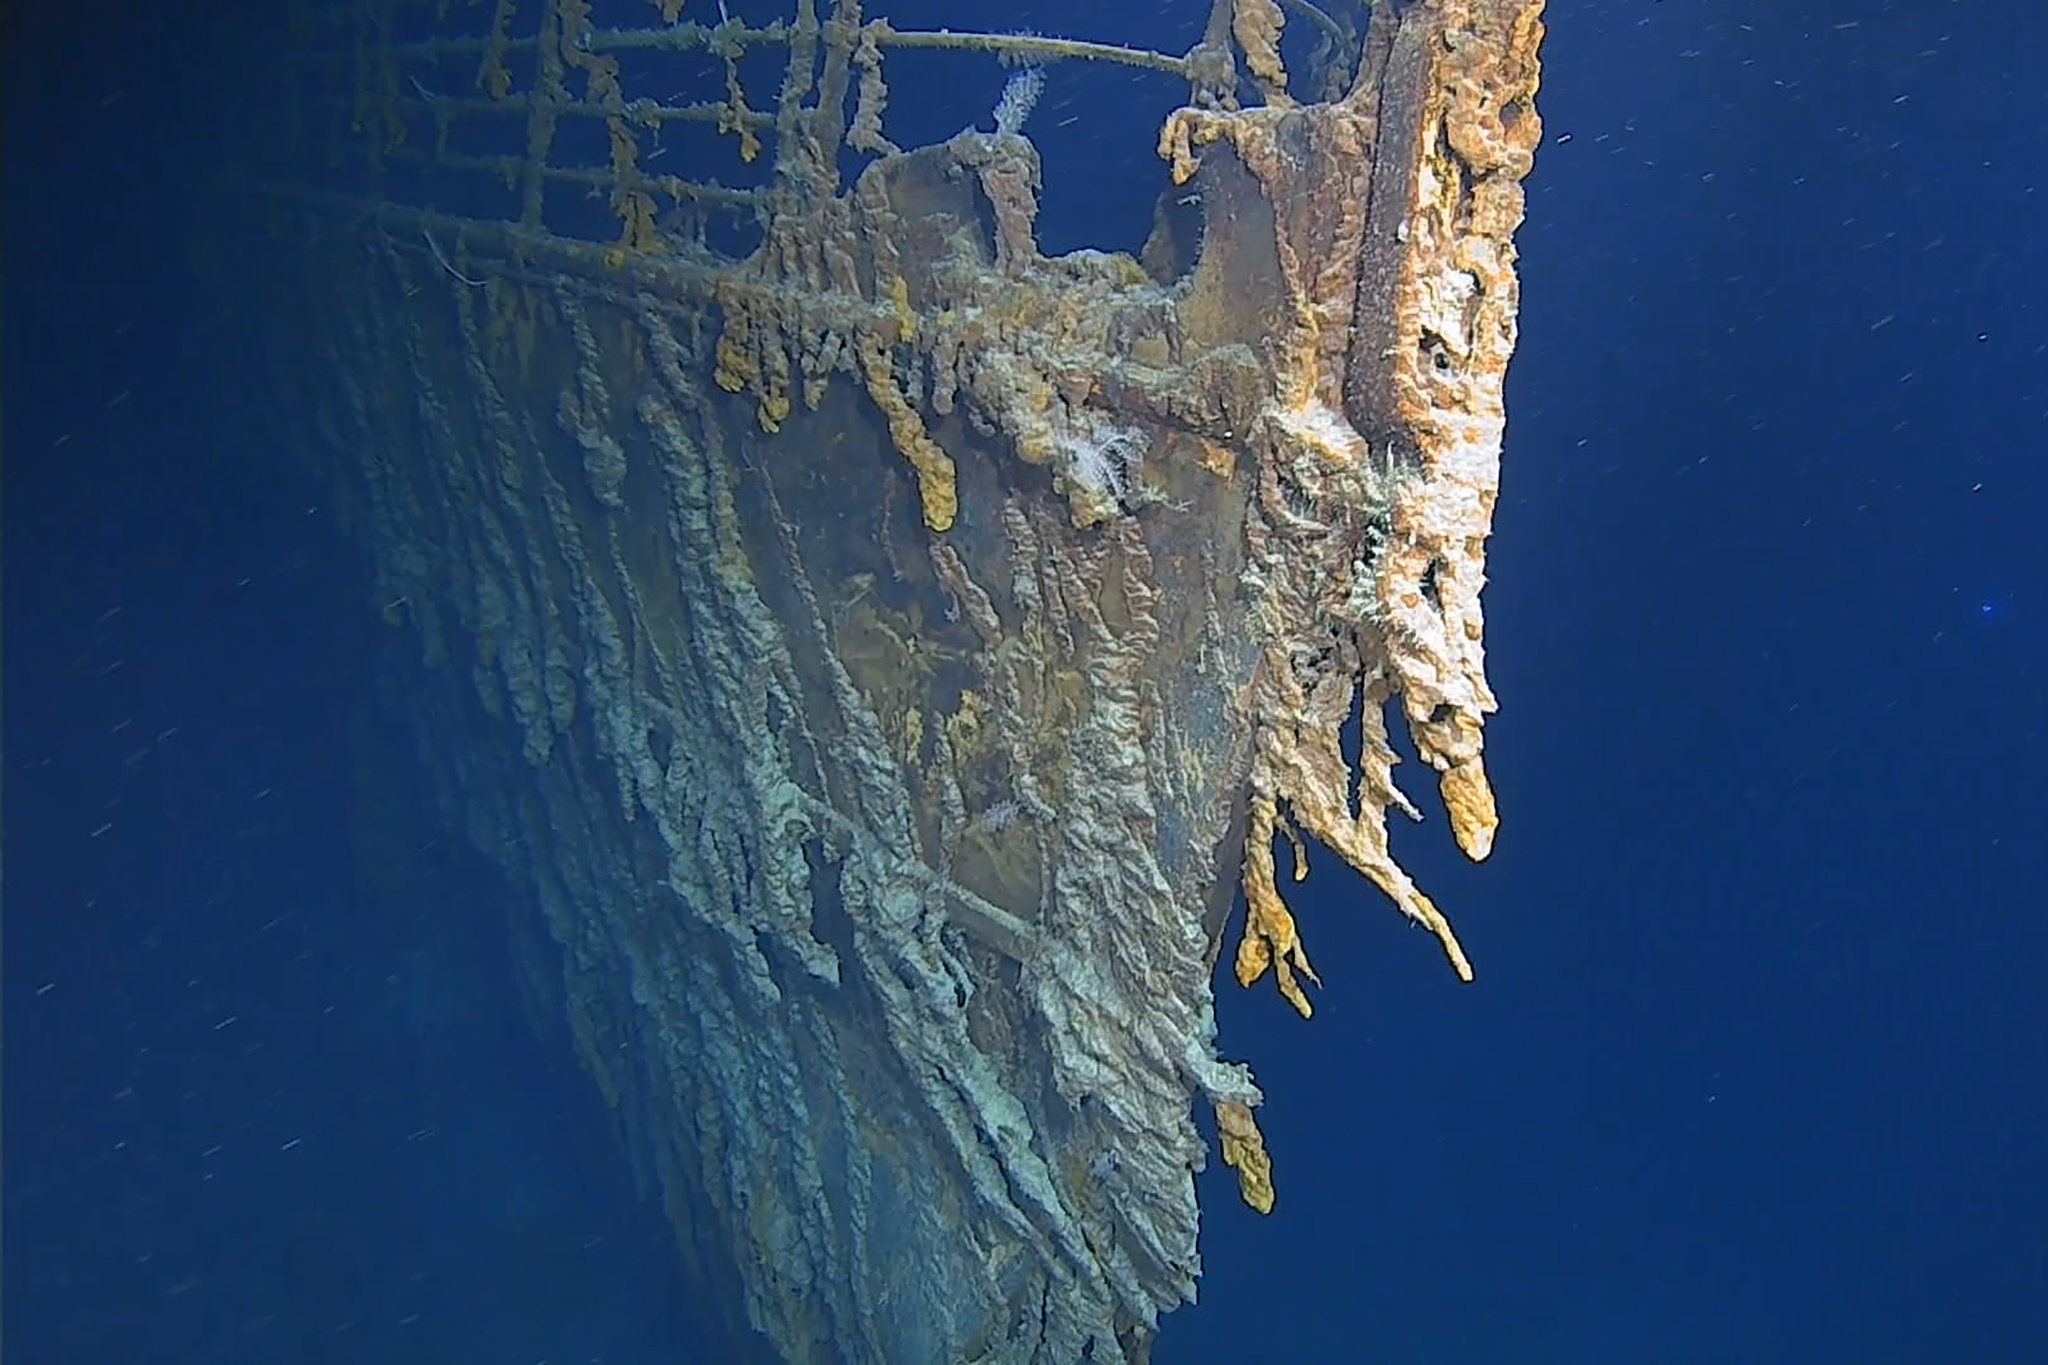 Where the Titanic Shipwreck Rests, New Photo Reveal Extensive Decay